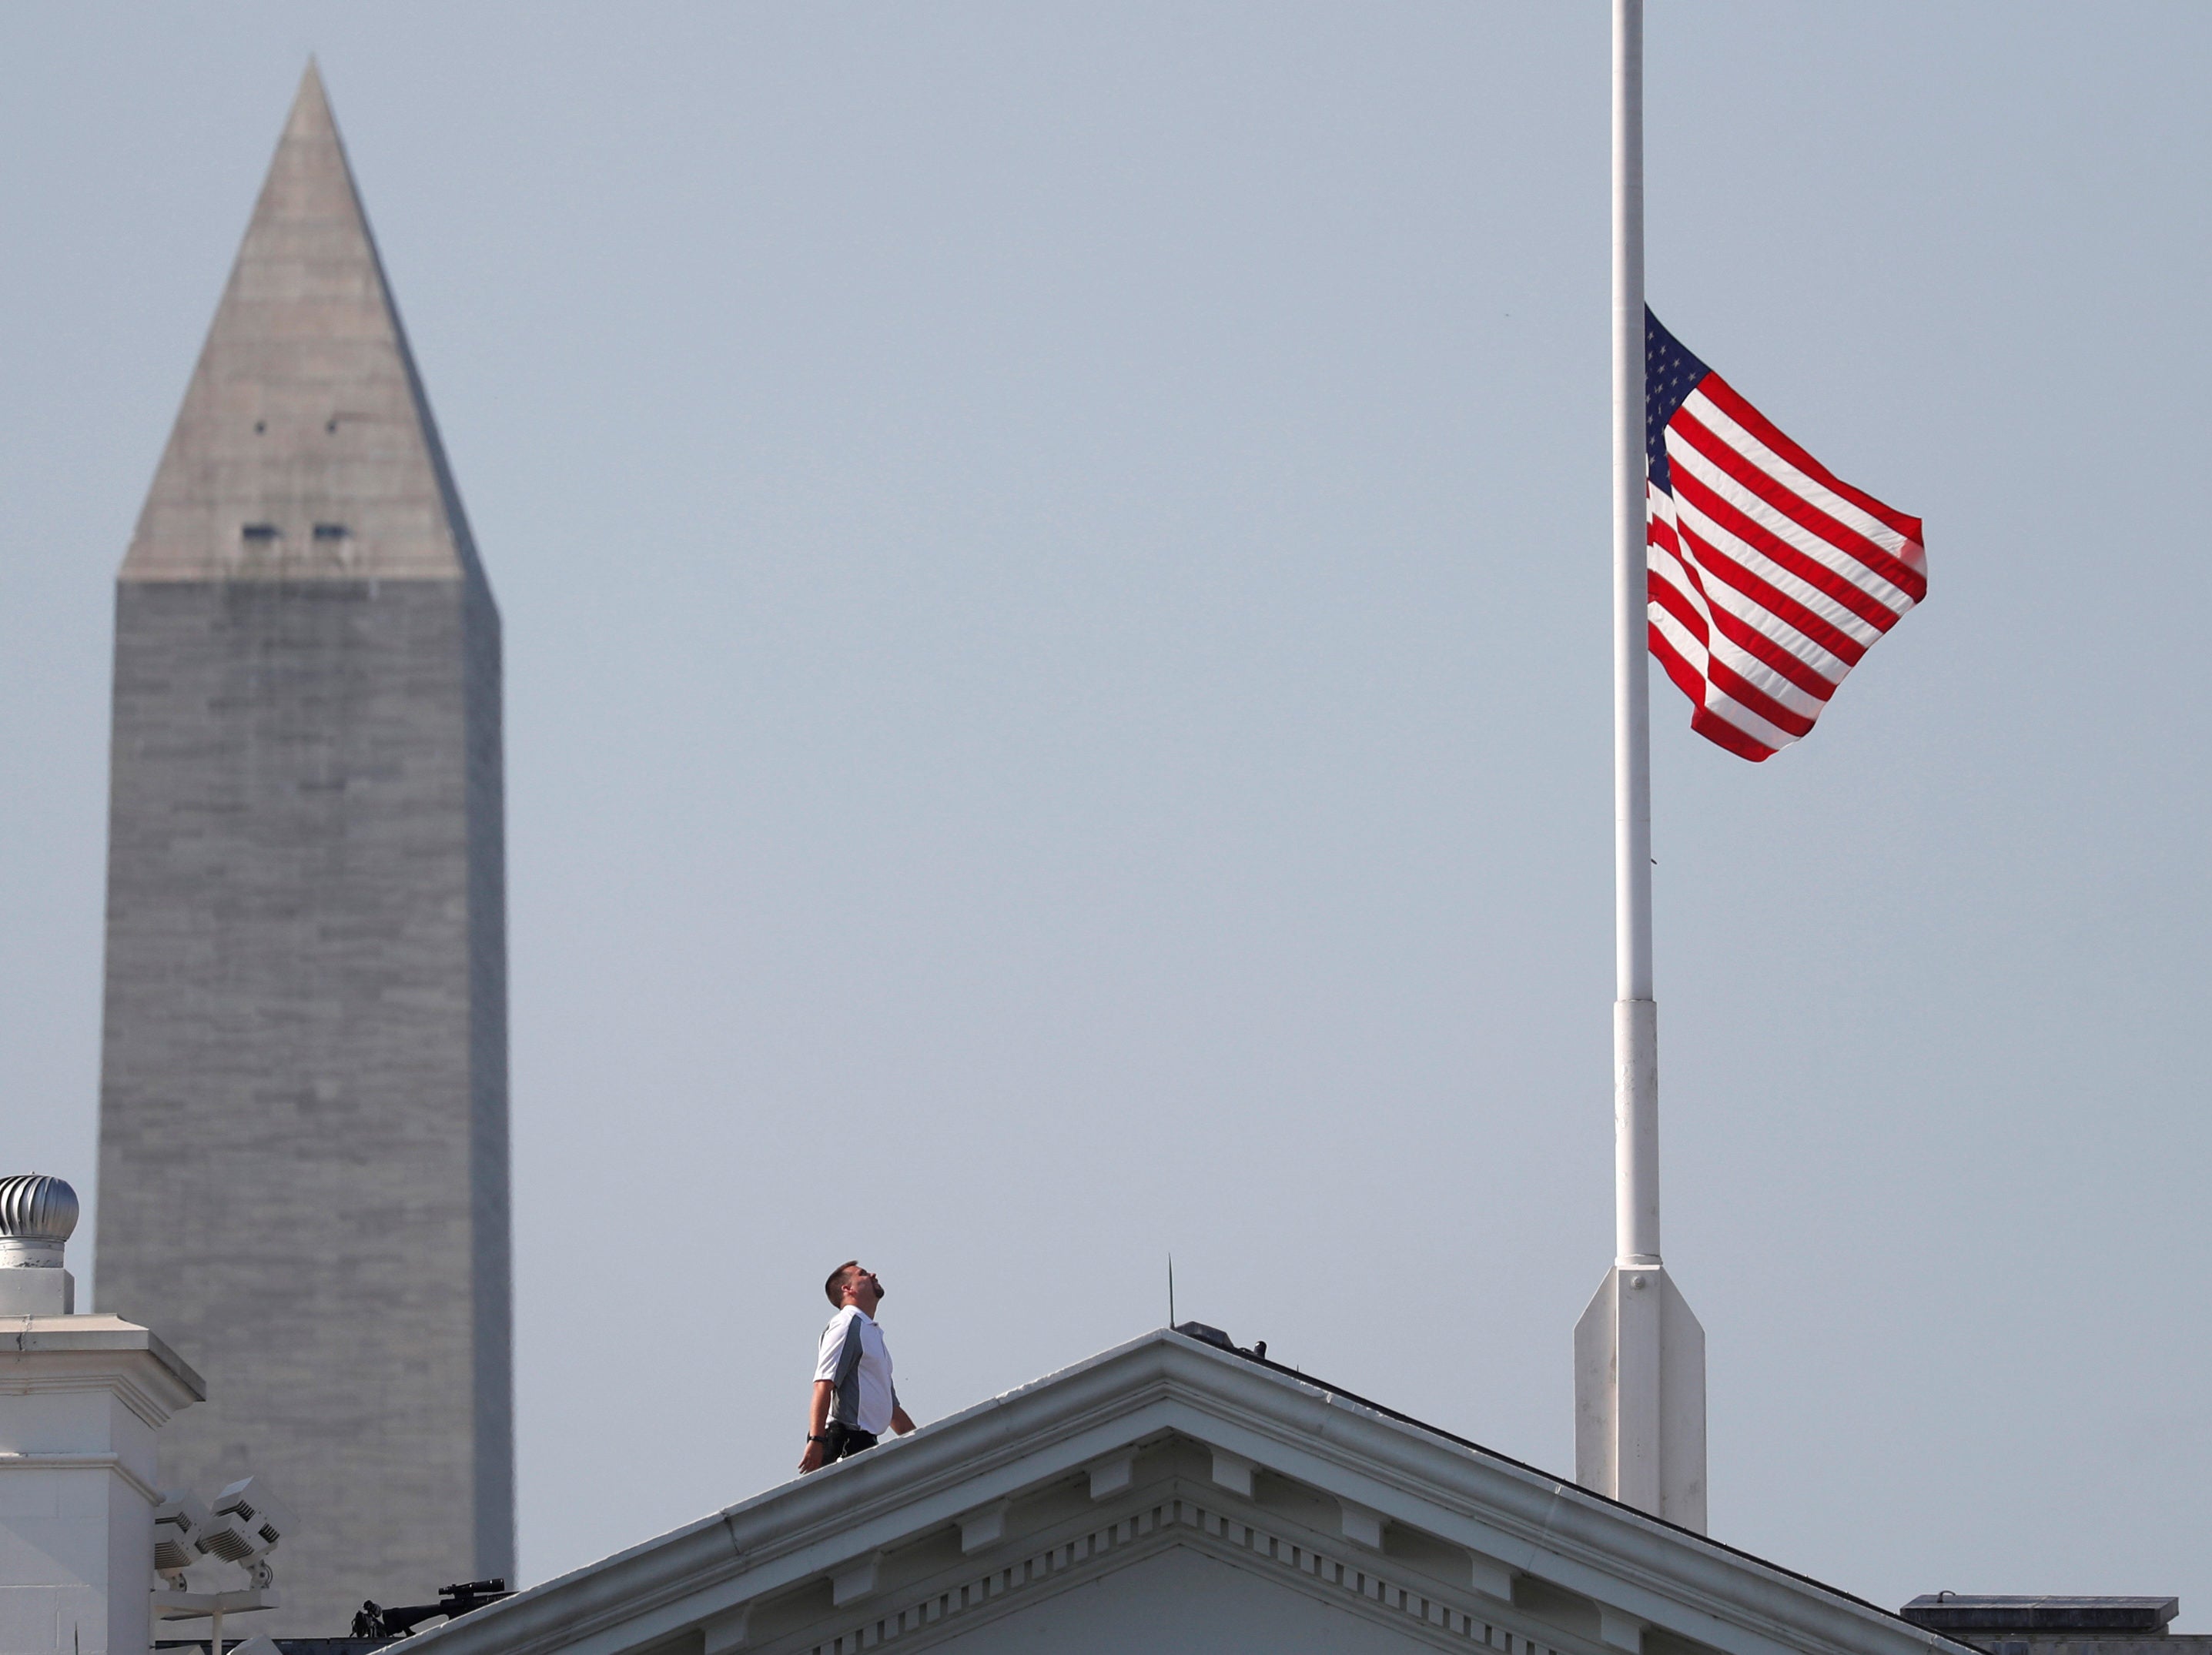 US flags flown at half-mast for five victims of shooting at Capital Gazette newsroom